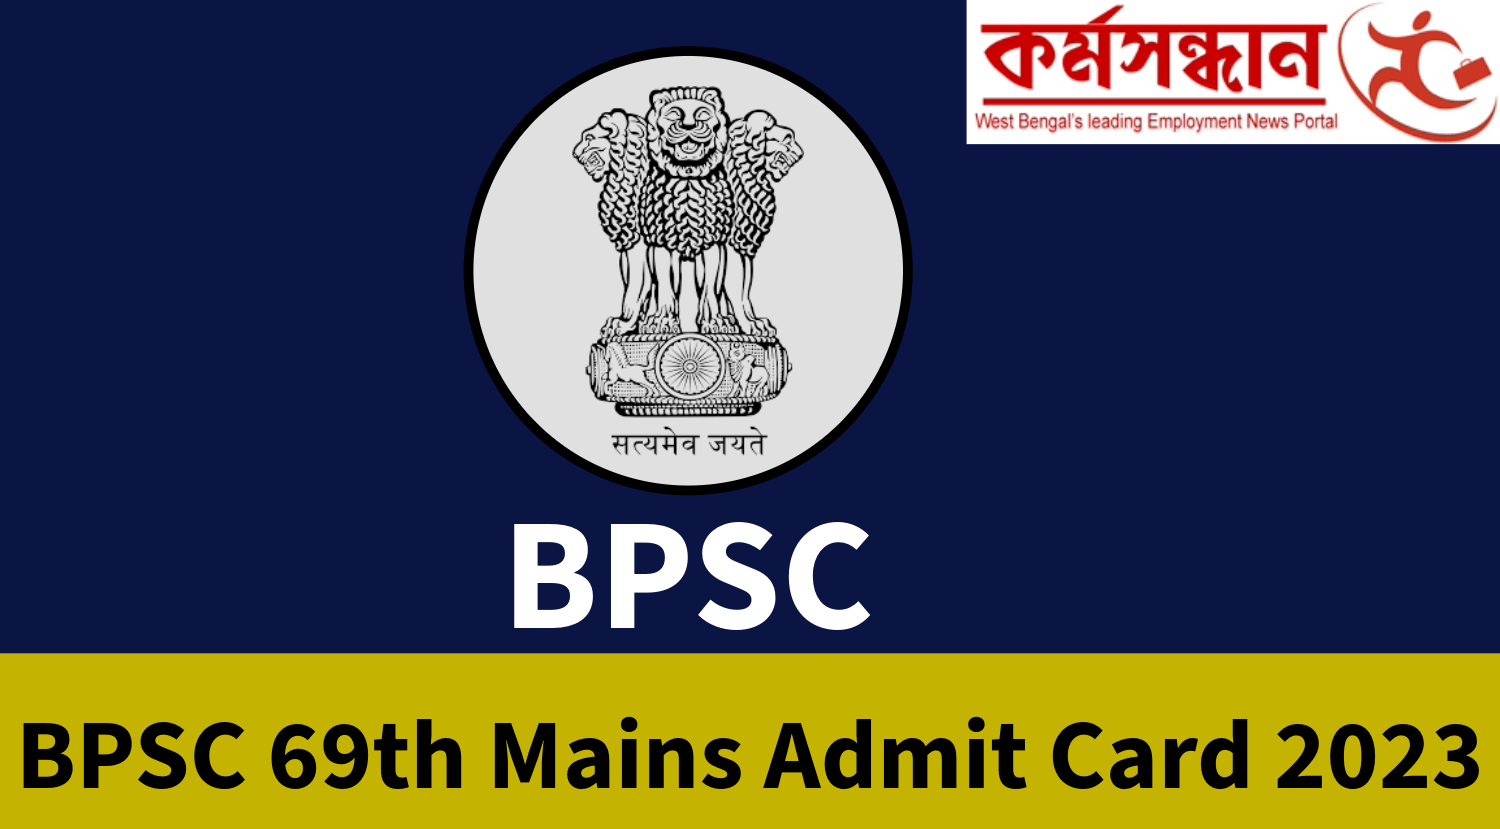 BPSC 68th Prelims Exam: Online application deadline with late fee extended  My Careers View - India's Best College, School and coaching